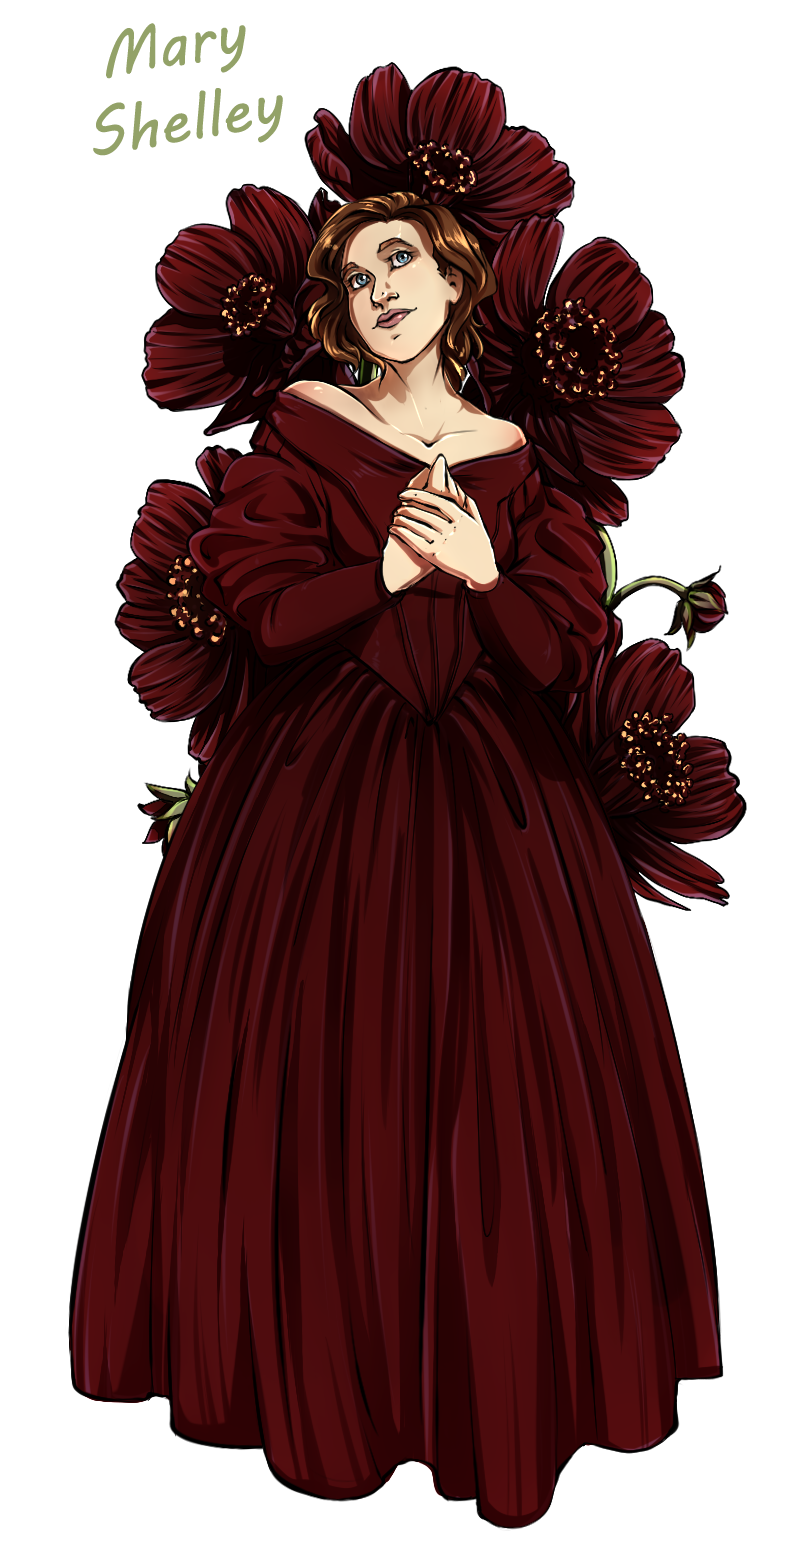 dw_flowers__mary_shelley_by_miss_alex_aphey-d9bbkgm.png